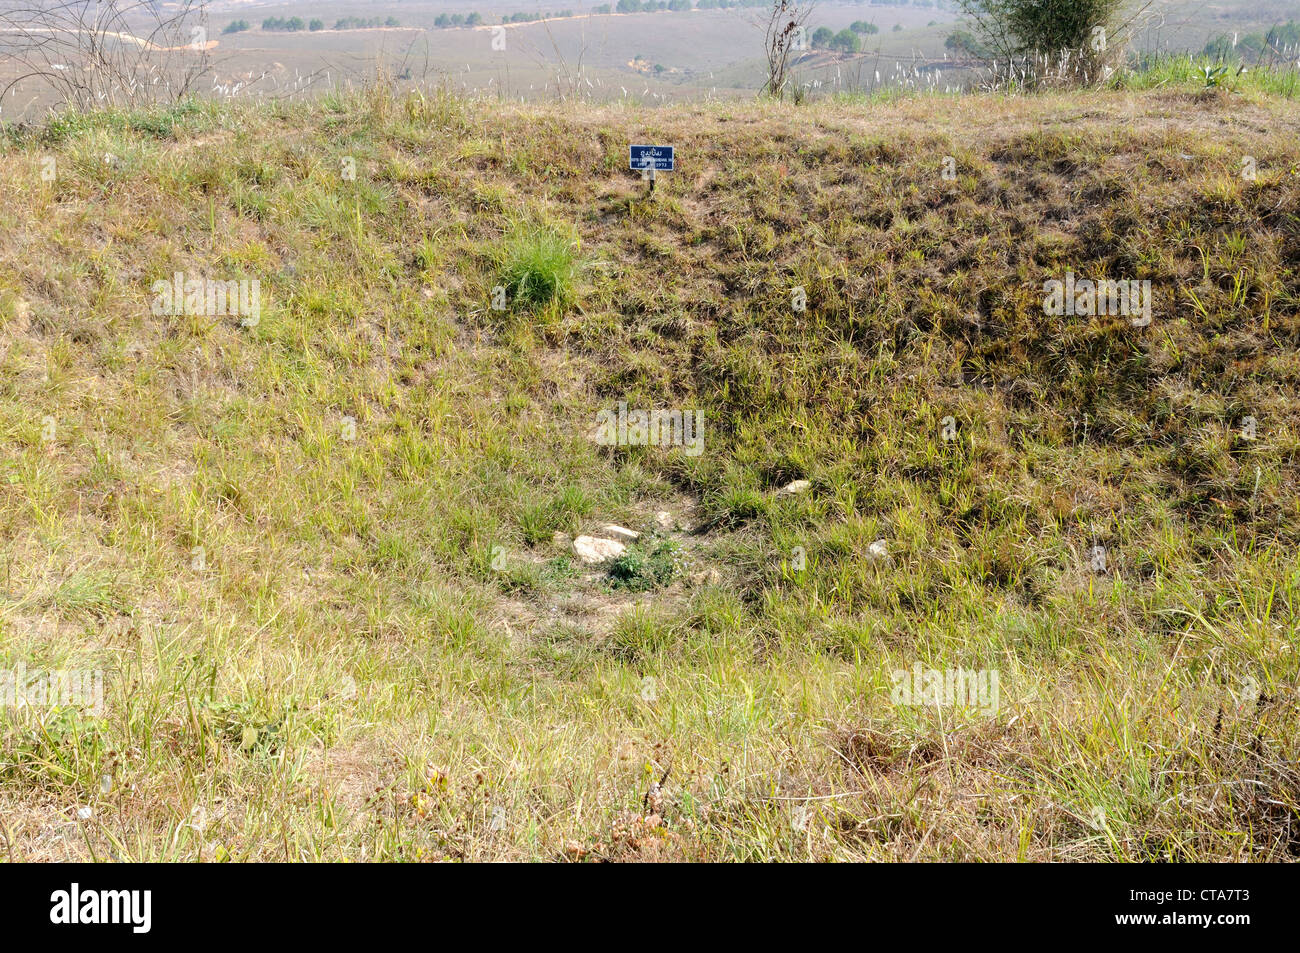 Bomb Crater during the War 1964-1973 Plain of jars site 1 Annamese Cordillera Xieng Khouang Province Northern Laos Stock Photo